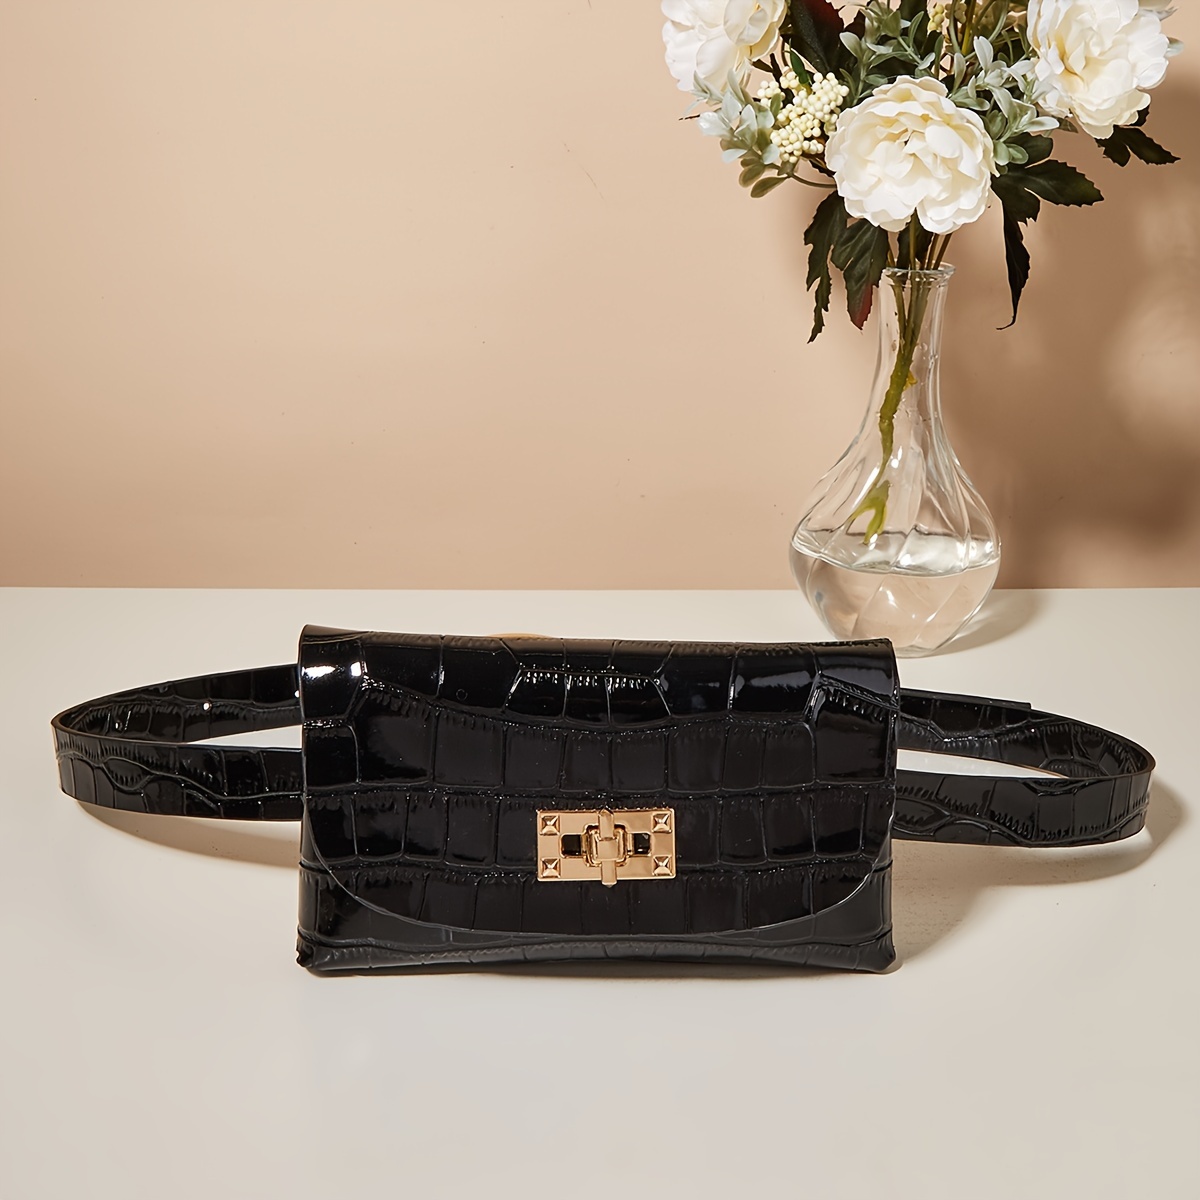 

Women's Stylish Mini Belt Bag, Pvc Material Bag With Detachable Strap Ideal For Daily Use And Travel(7.48''x 4.33'')